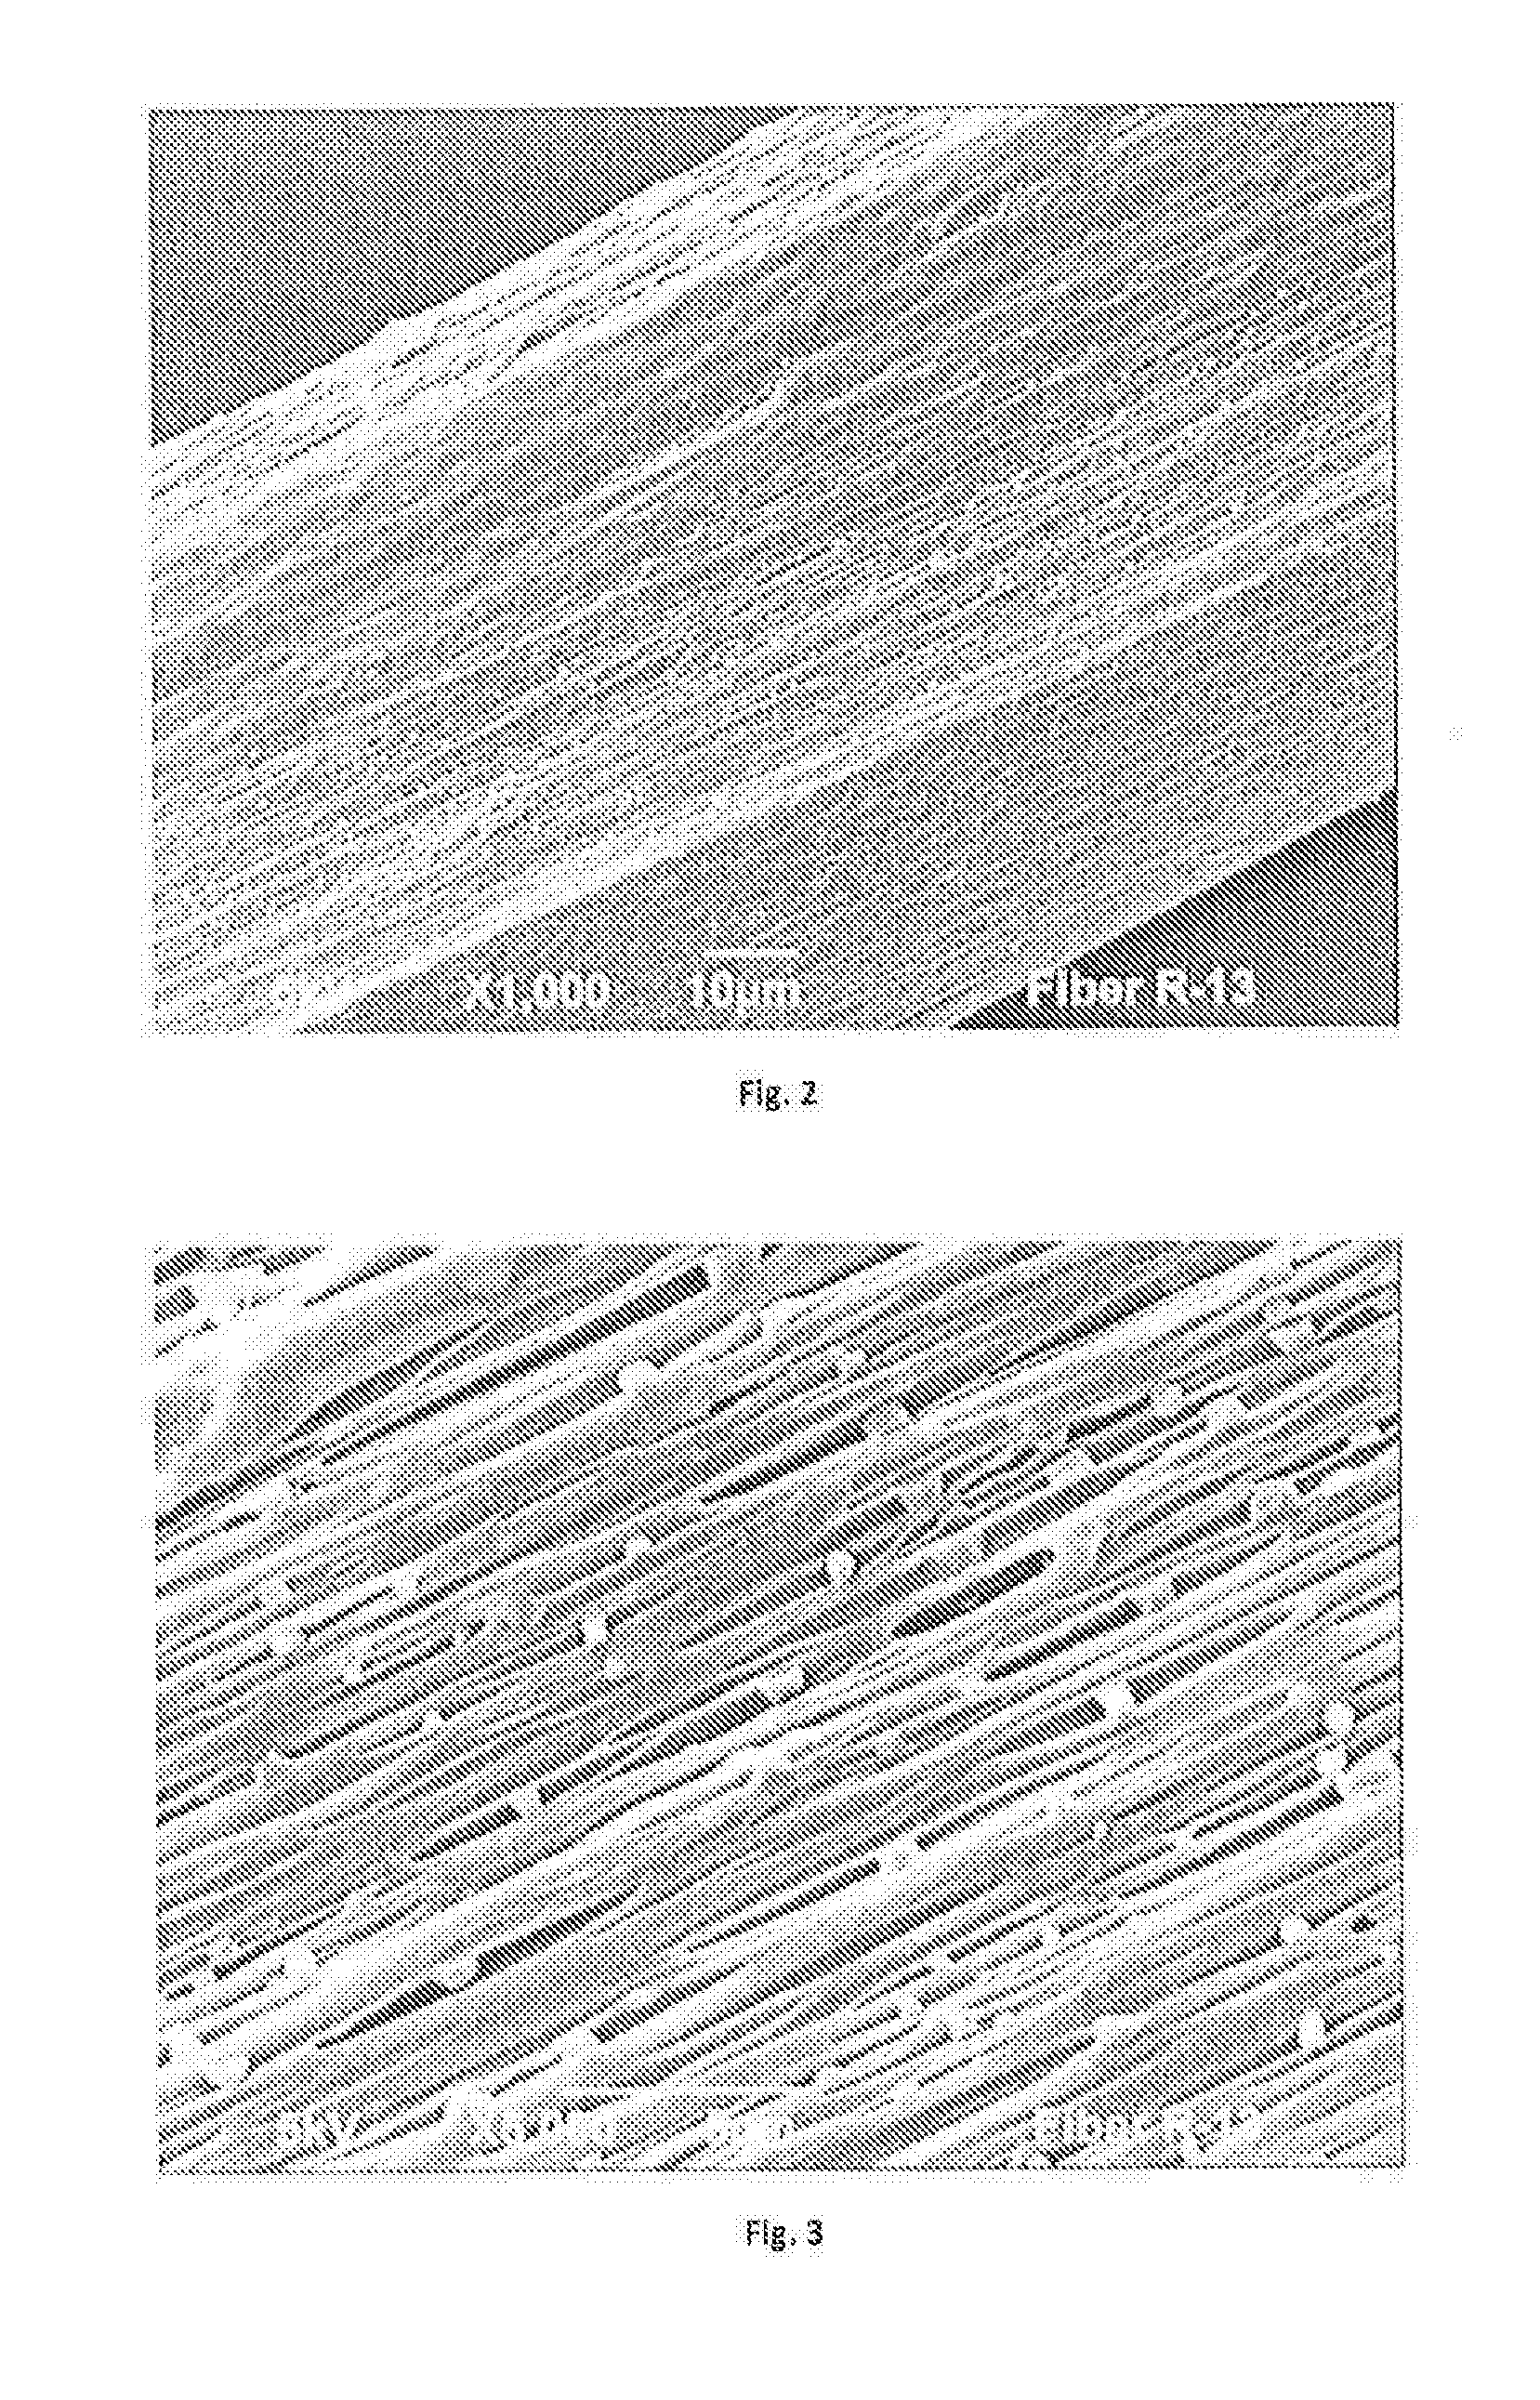 Absorbent Article Containing a Nonwoven Web Formed from a Porous Polyolefin Fibers